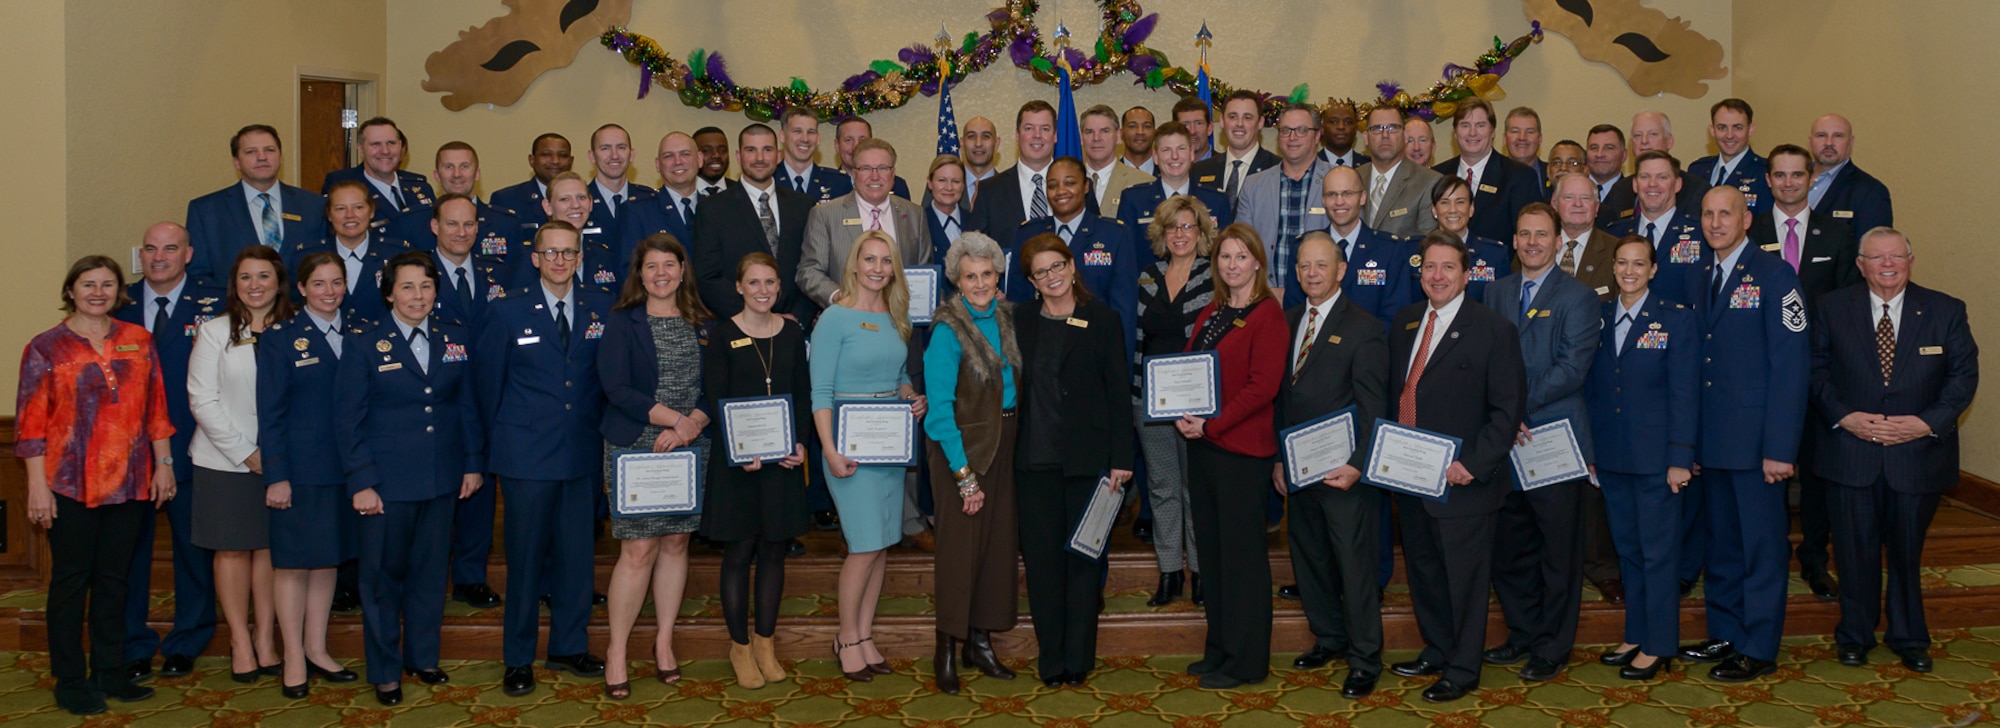 Keesler leadership poses for a group photo with current and newly inducted honorary commanders during the 2018 Honorary Commanders Induction Ceremony at the Bay Breeze Event Center Jan. 26, 2018, on Keesler Air Force Base, Mississippi. The event recognized the newest members of Keesler’s honorary commanders program, which is a partnership between base leadership and local civic leaders to promote strong ties between military and civilian leaders. (U.S. Air Force photo by André Askew)